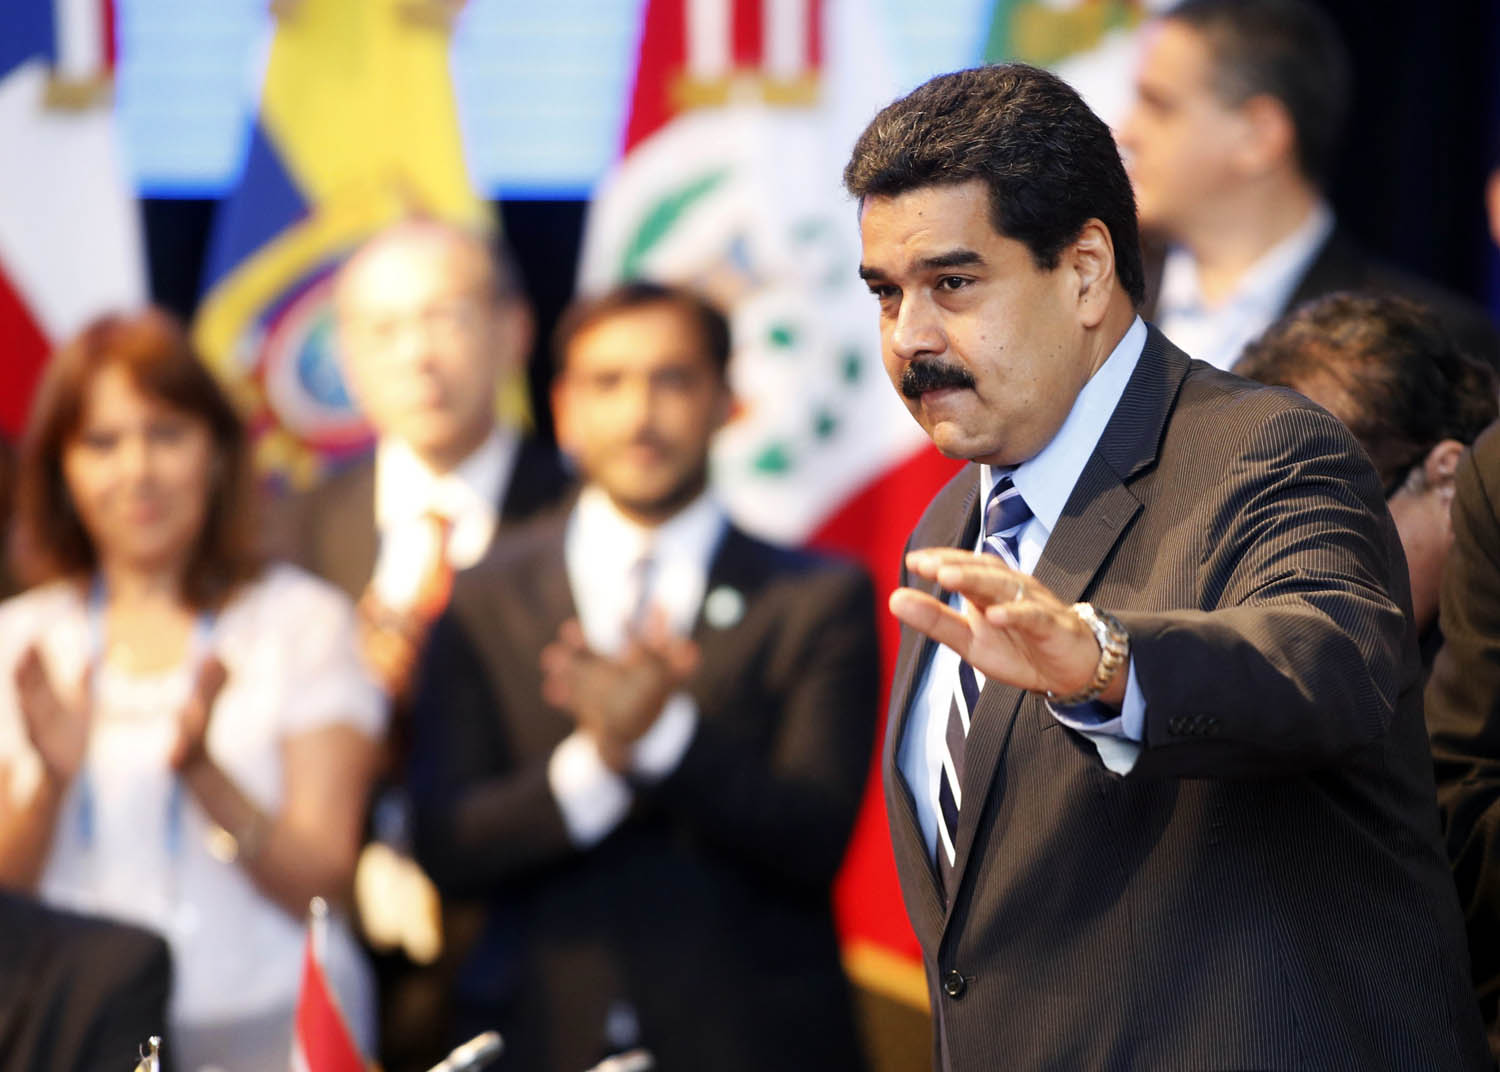 Venezuela's President Nicolas Maduro gestures during the Southern Common Market (MERCOSUR) trade bloc annual presidential 47th summit in Parana